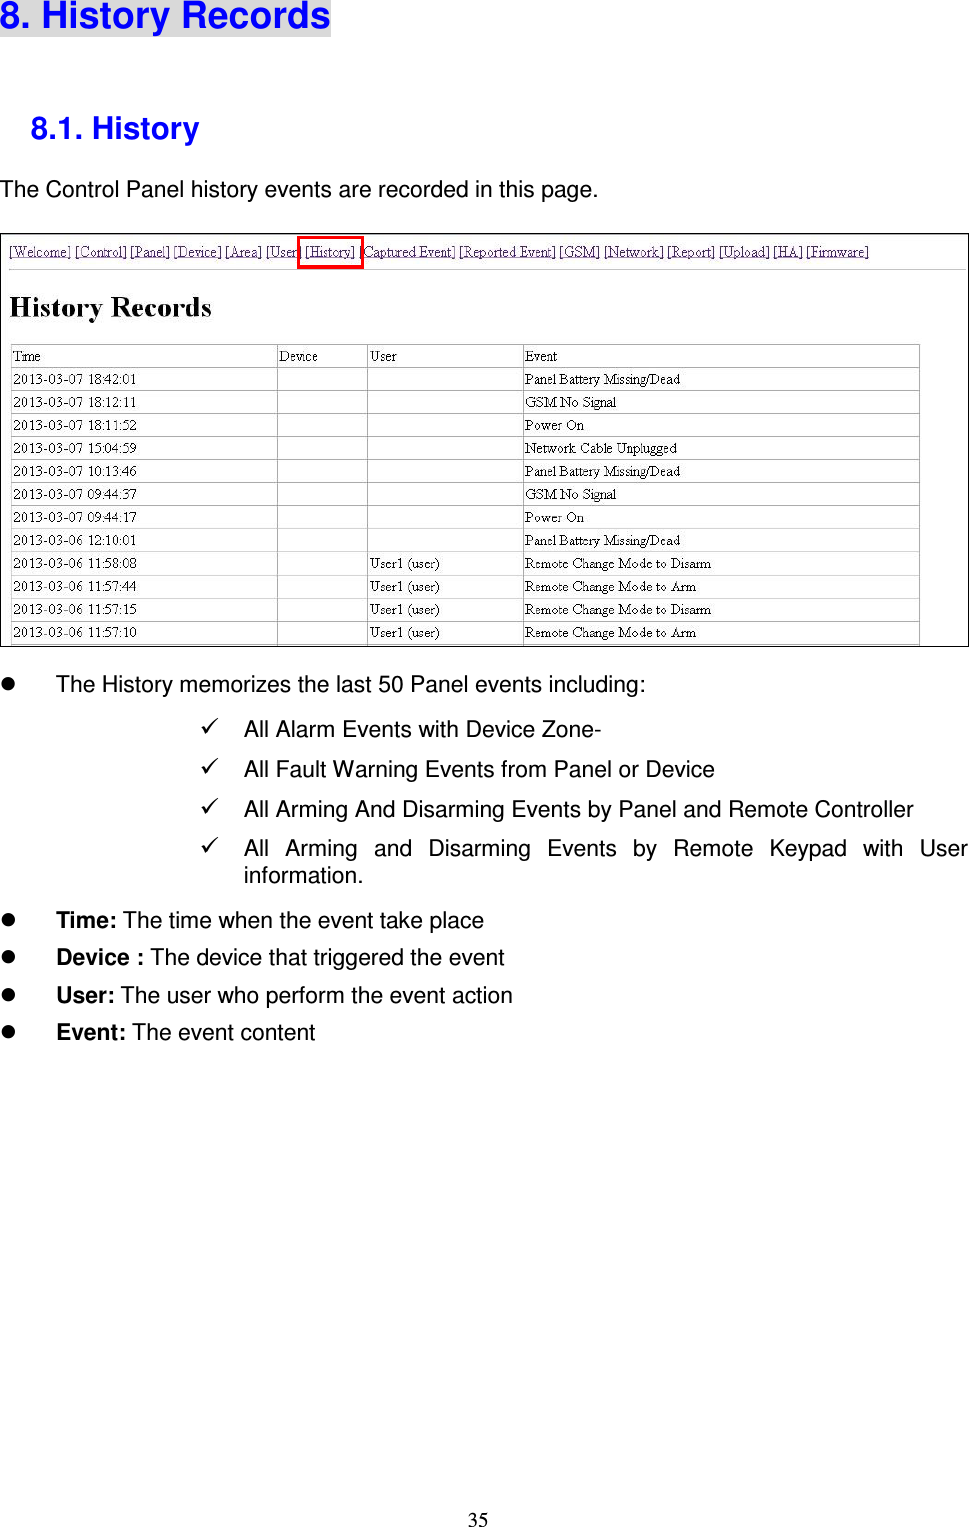  35 8. History Records  8.1. History   The Control Panel history events are recorded in this page.            The History memorizes the last 50 Panel events including:  All Alarm Events with Device Zone-  All Fault Warning Events from Panel or Device  All Arming And Disarming Events by Panel and Remote Controller  All  Arming  and  Disarming  Events  by  Remote  Keypad  with  User   information.  Time: The time when the event take place  Device : The device that triggered the event  User: The user who perform the event action  Event: The event content             